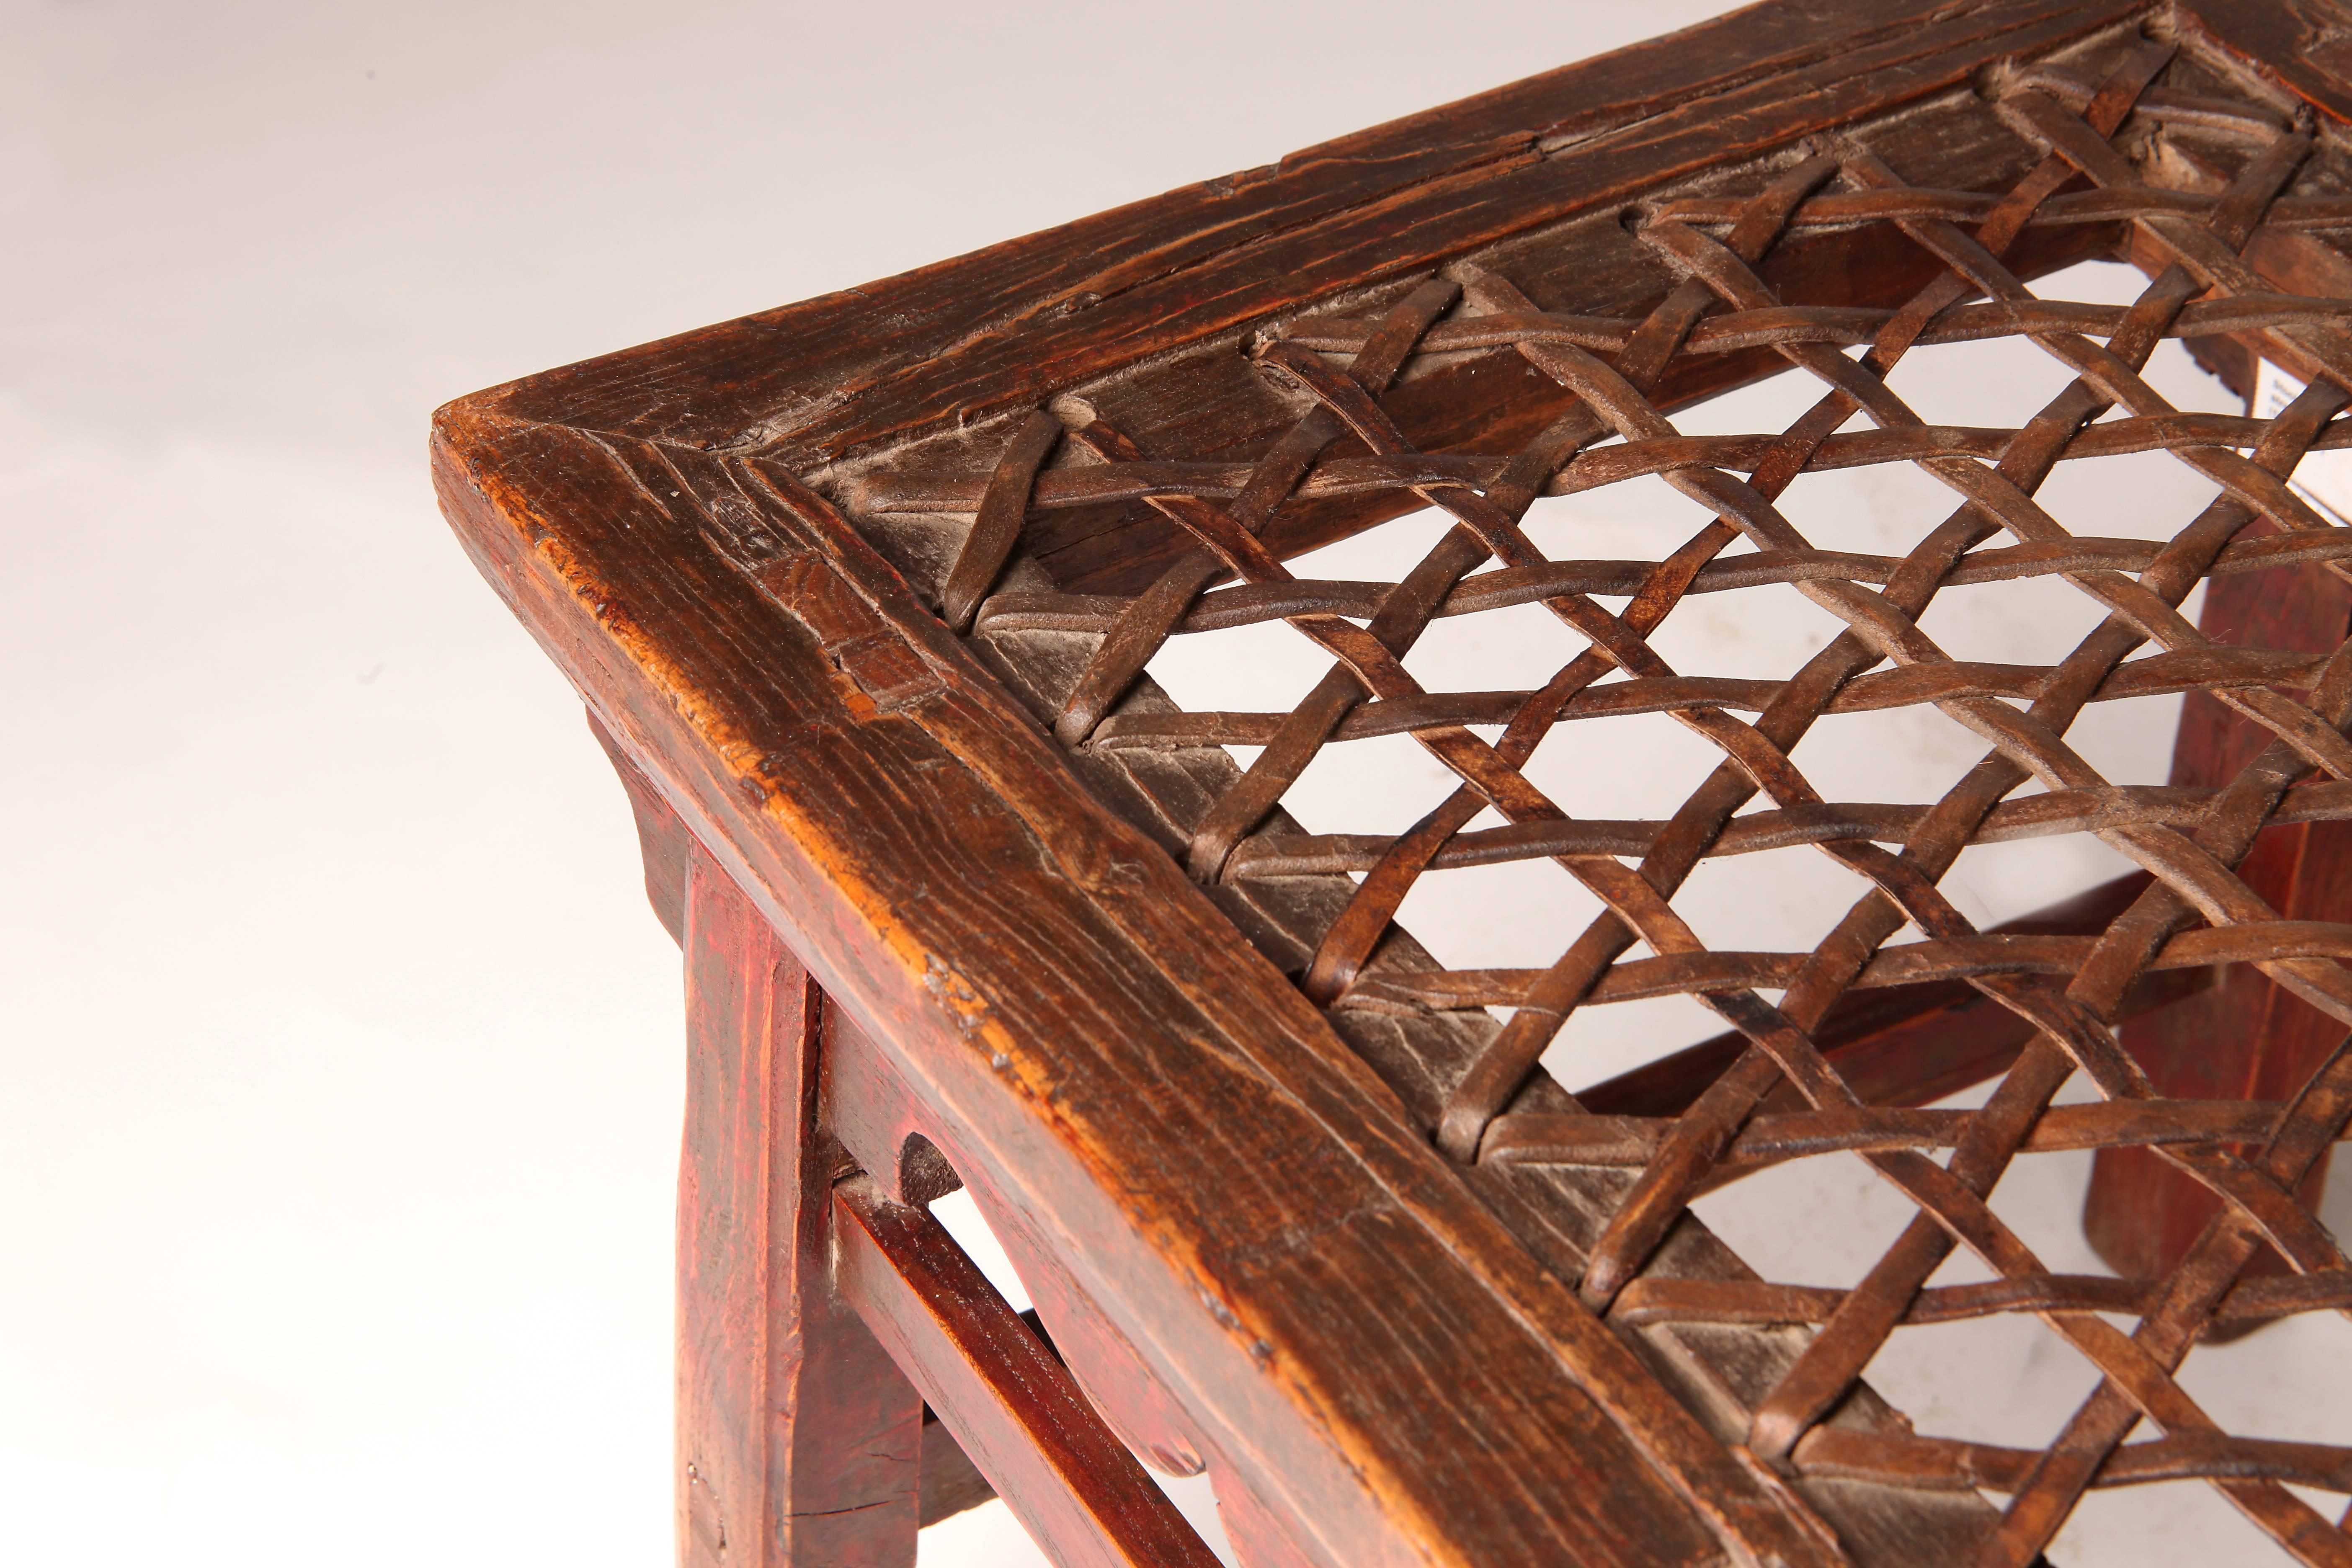 20th Century Chinese Rectangular Stool with Woven Seat